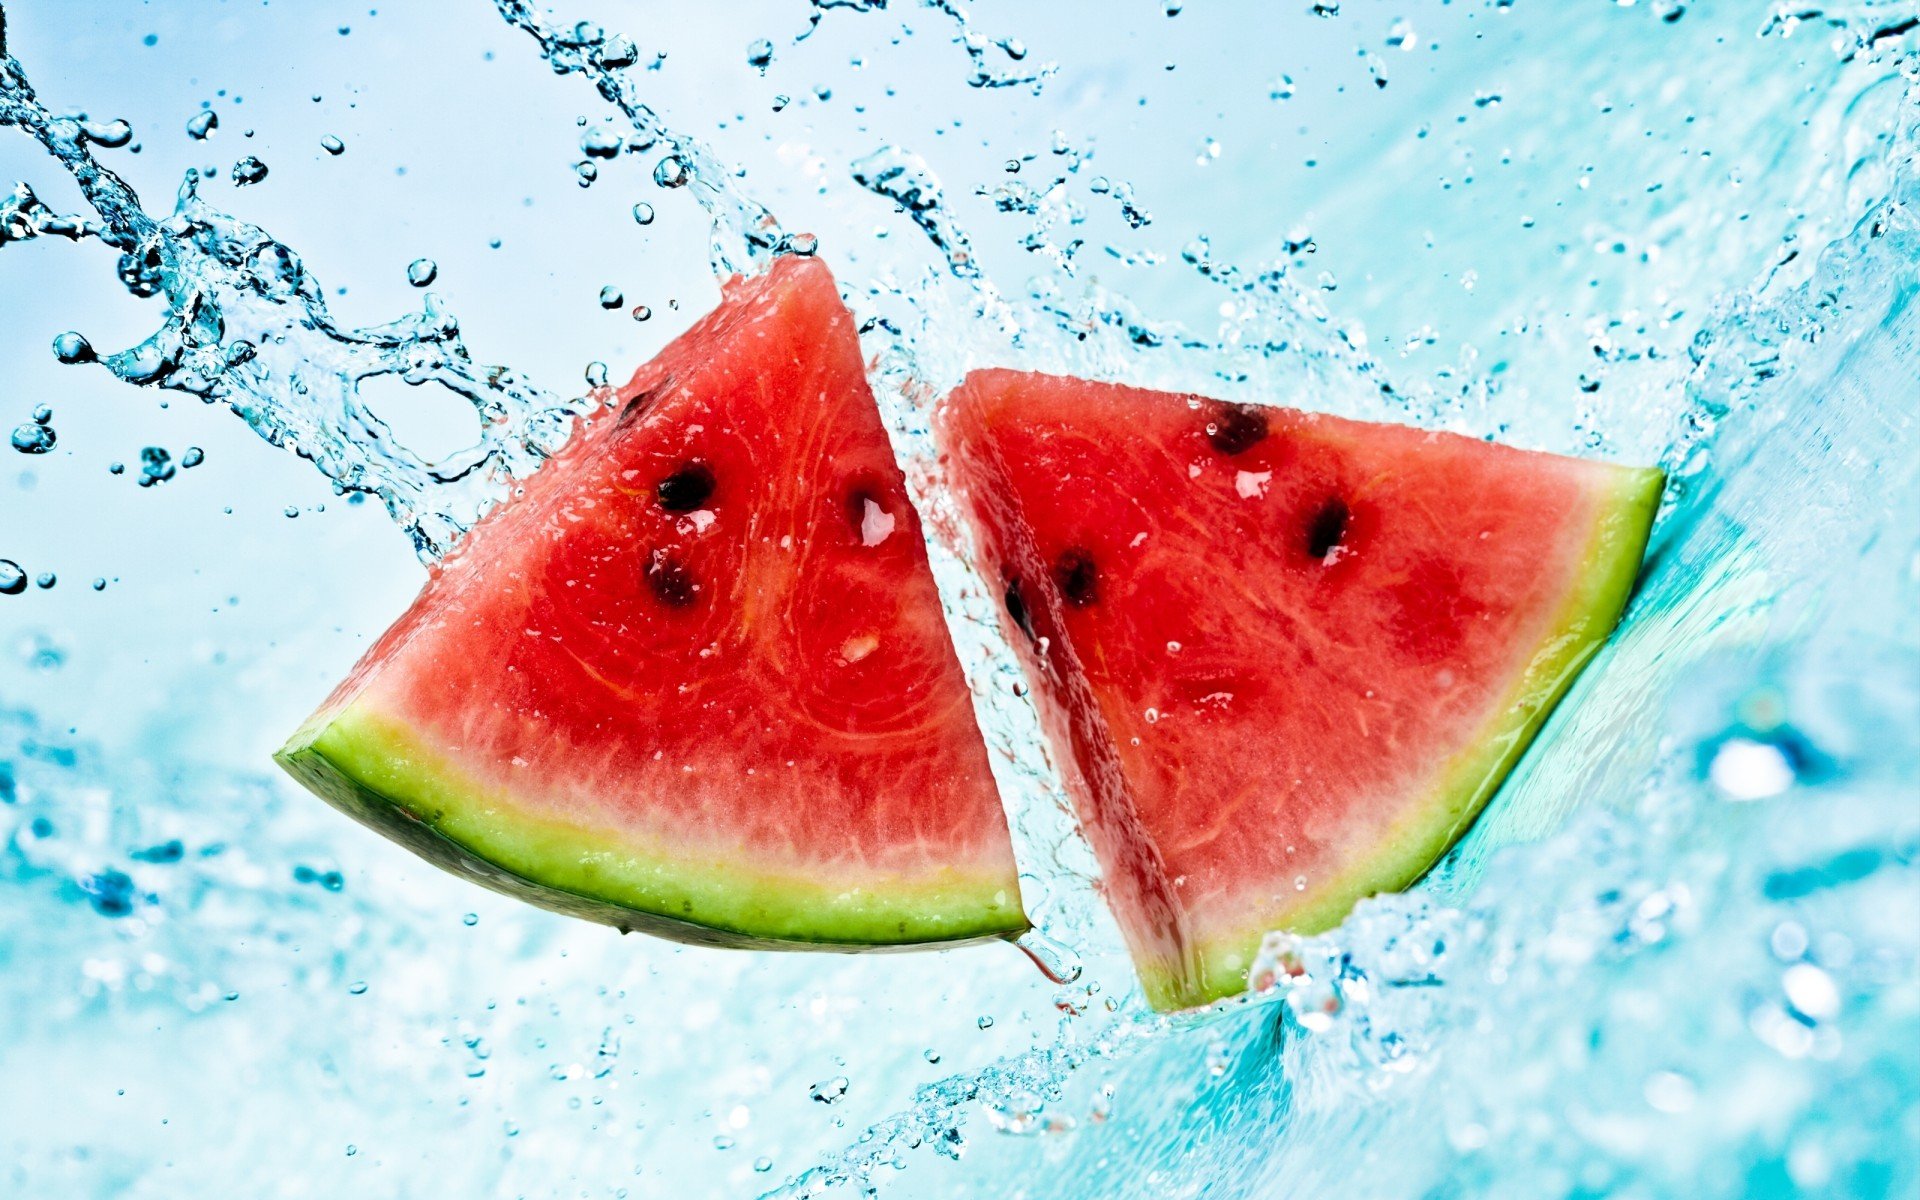 Download hd 1920x1200 Watermelon PC background ID:162651 for free